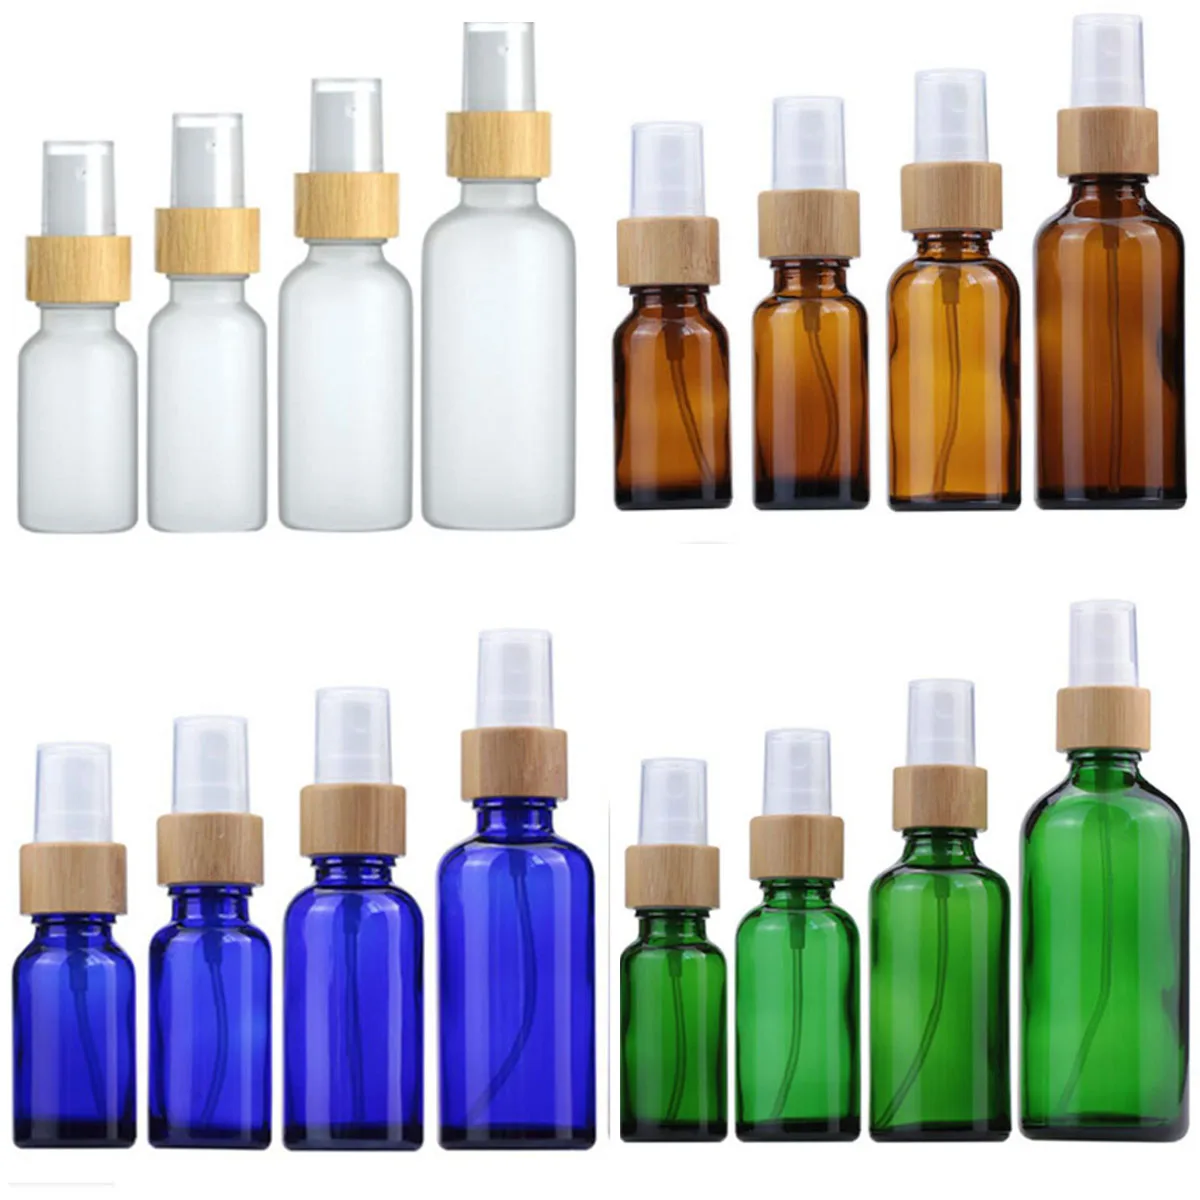 30Pcs/Lot 30ml Frosted Glass bottles with Bamboo Serum Pump Cap Refillable Thick Metal Glass Cream Vials Home DIY Toll